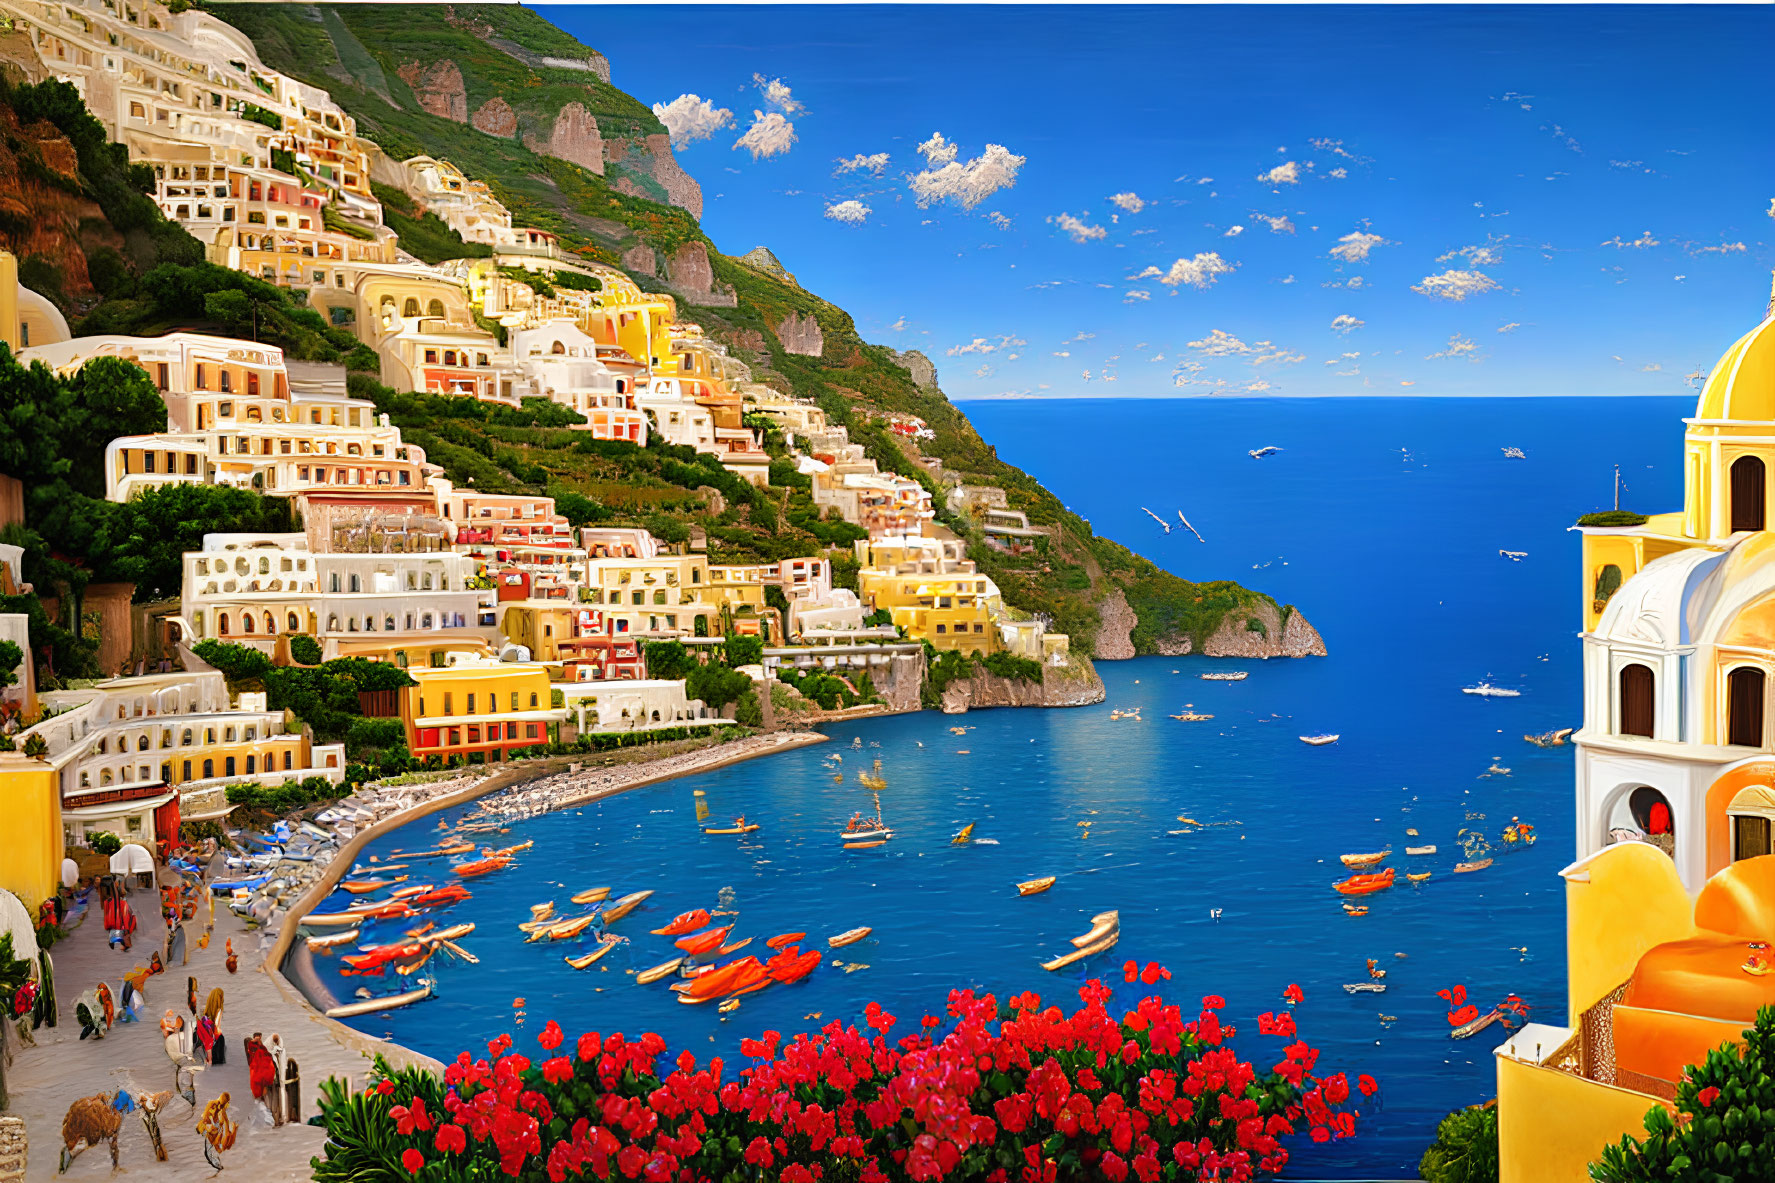 Scenic coastal town with colorful buildings, people, boats, and blue sky